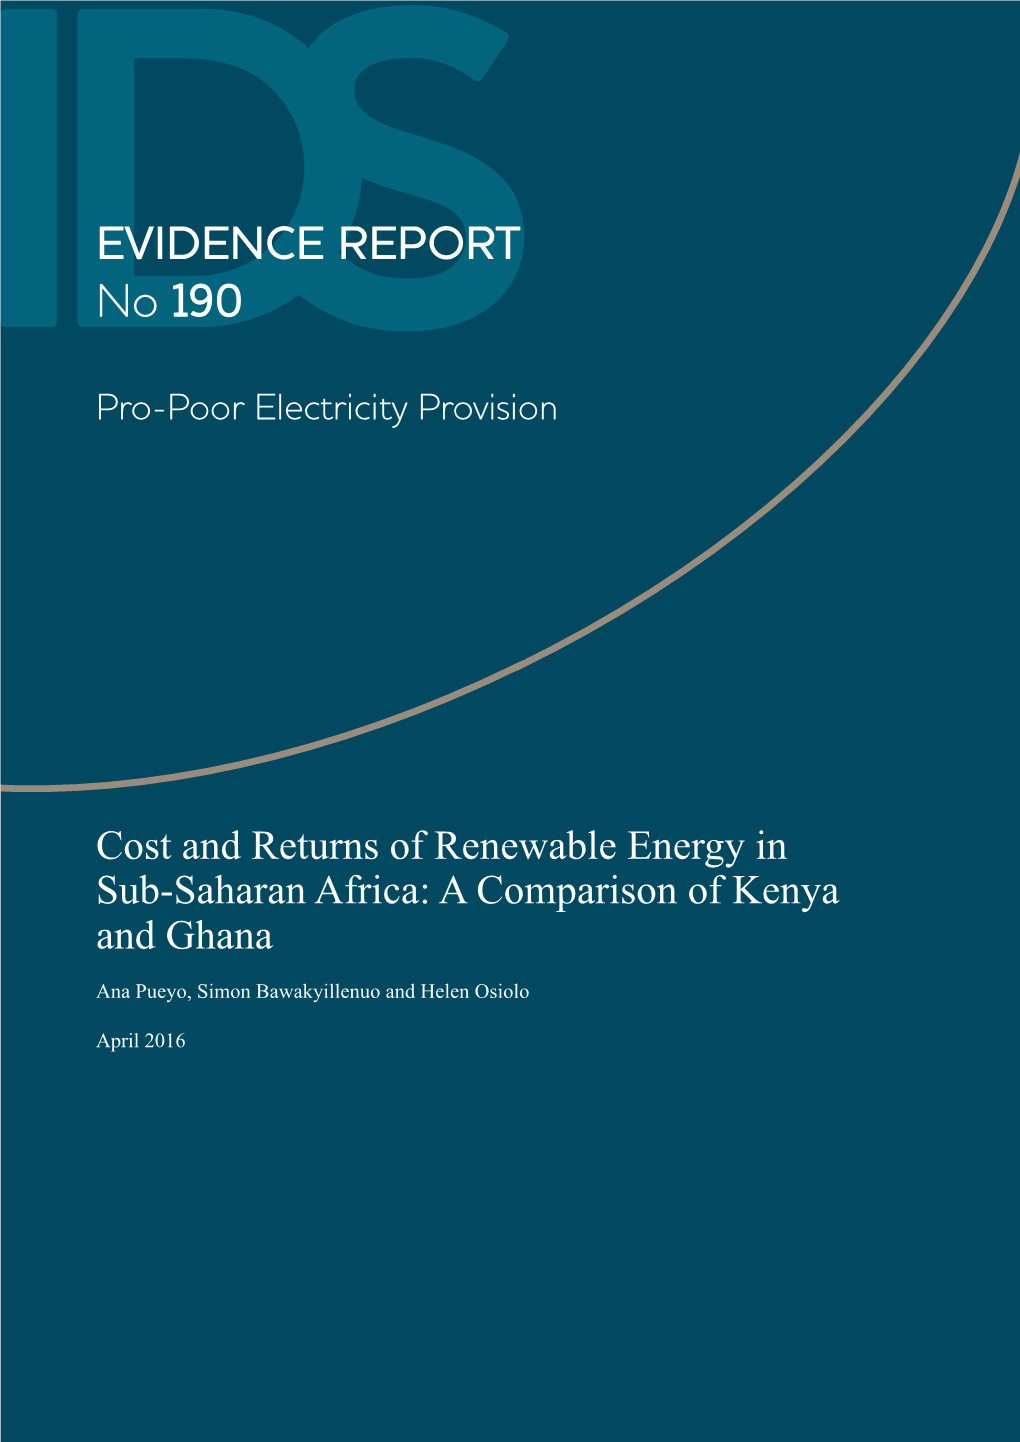 Cost and Returns of Renewable Energy in Sub-Saharan Africa: a Comparison of Kenya and Ghana